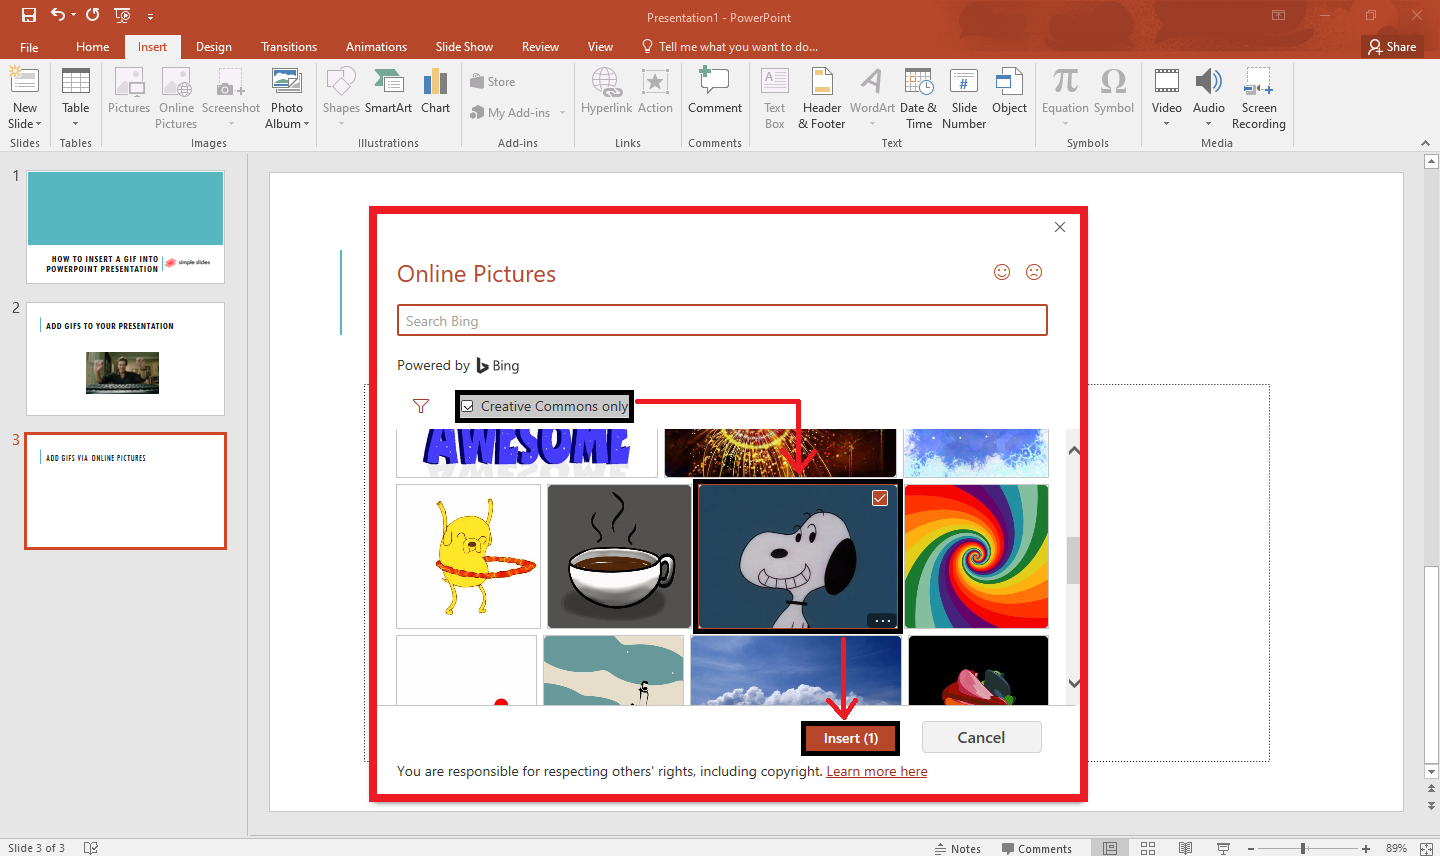 Check the box beside "Creative commons only" and select a GIF in PowerPoint